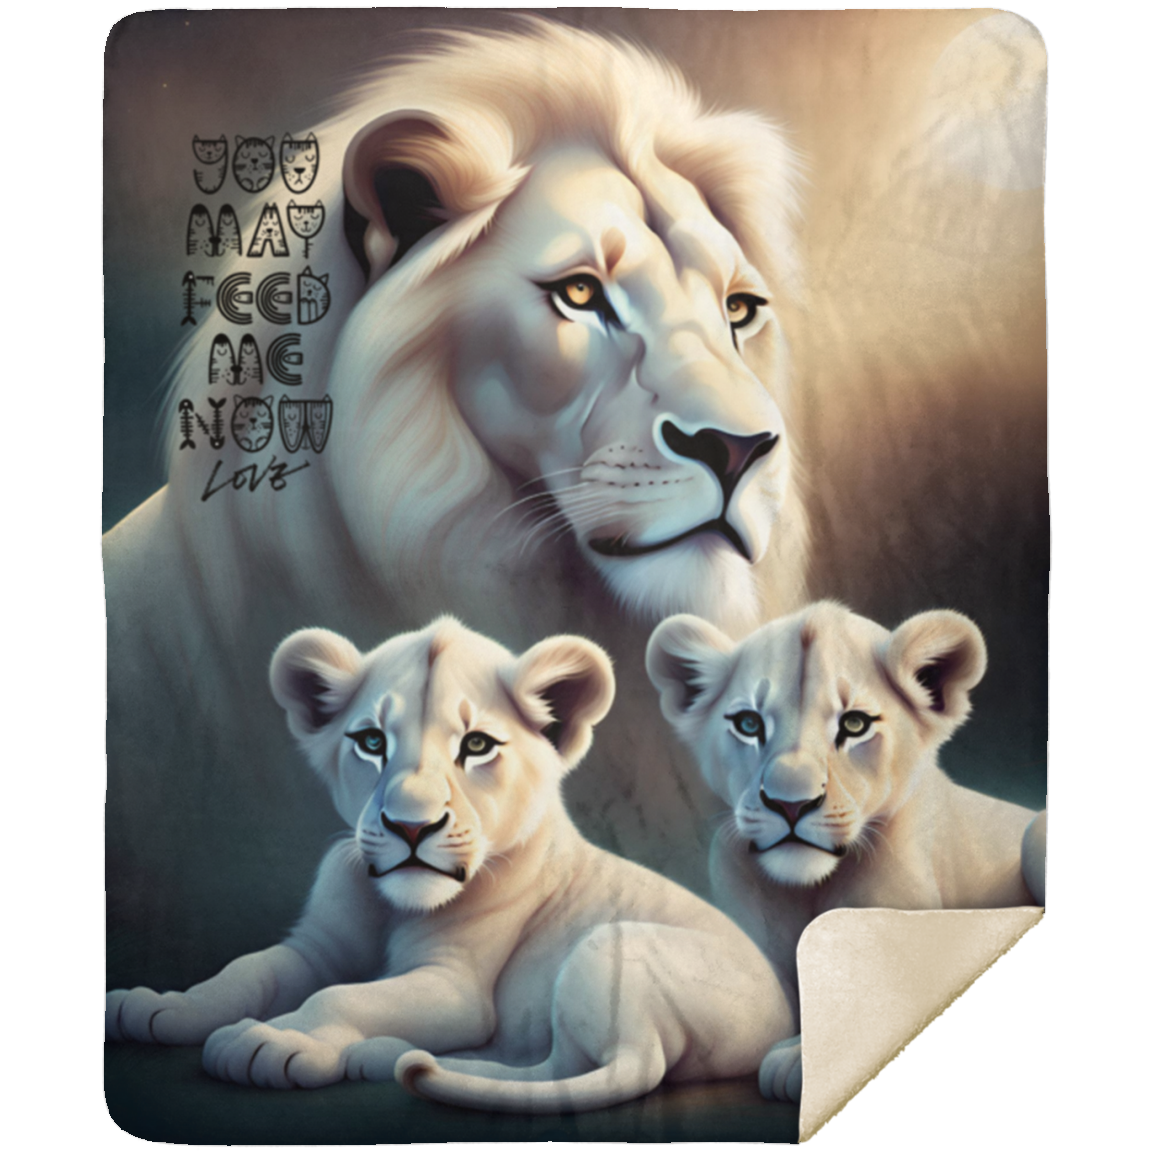 LION & CUBS FEED ME-Premium Mink Sherpa Blanket 50x60 SALE price $49.95 USD.